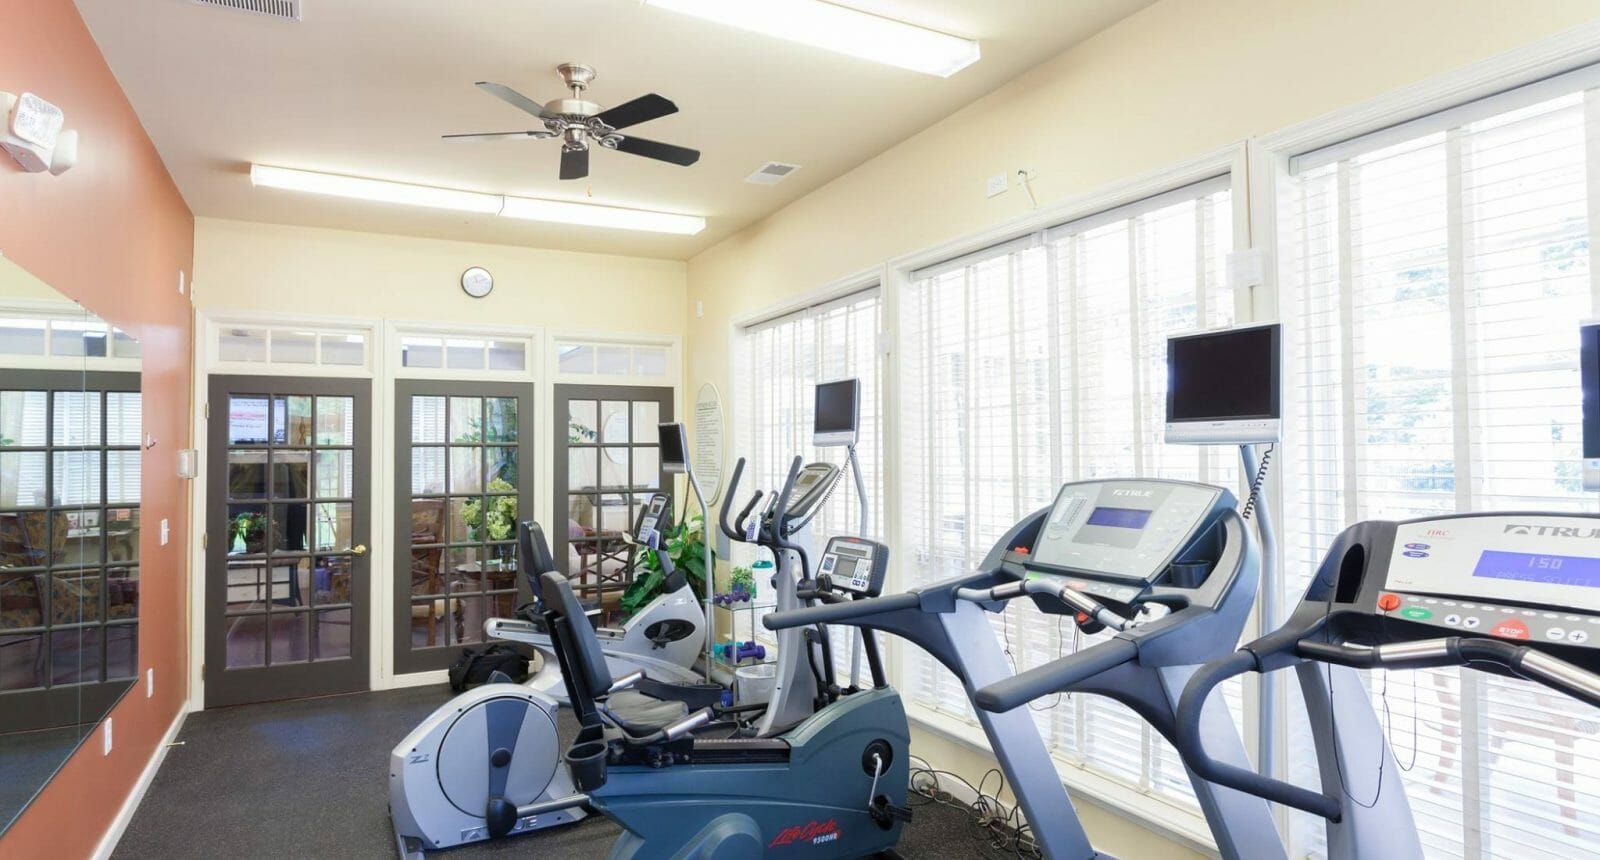 Gym room with exercise equipment at Alexander Heights